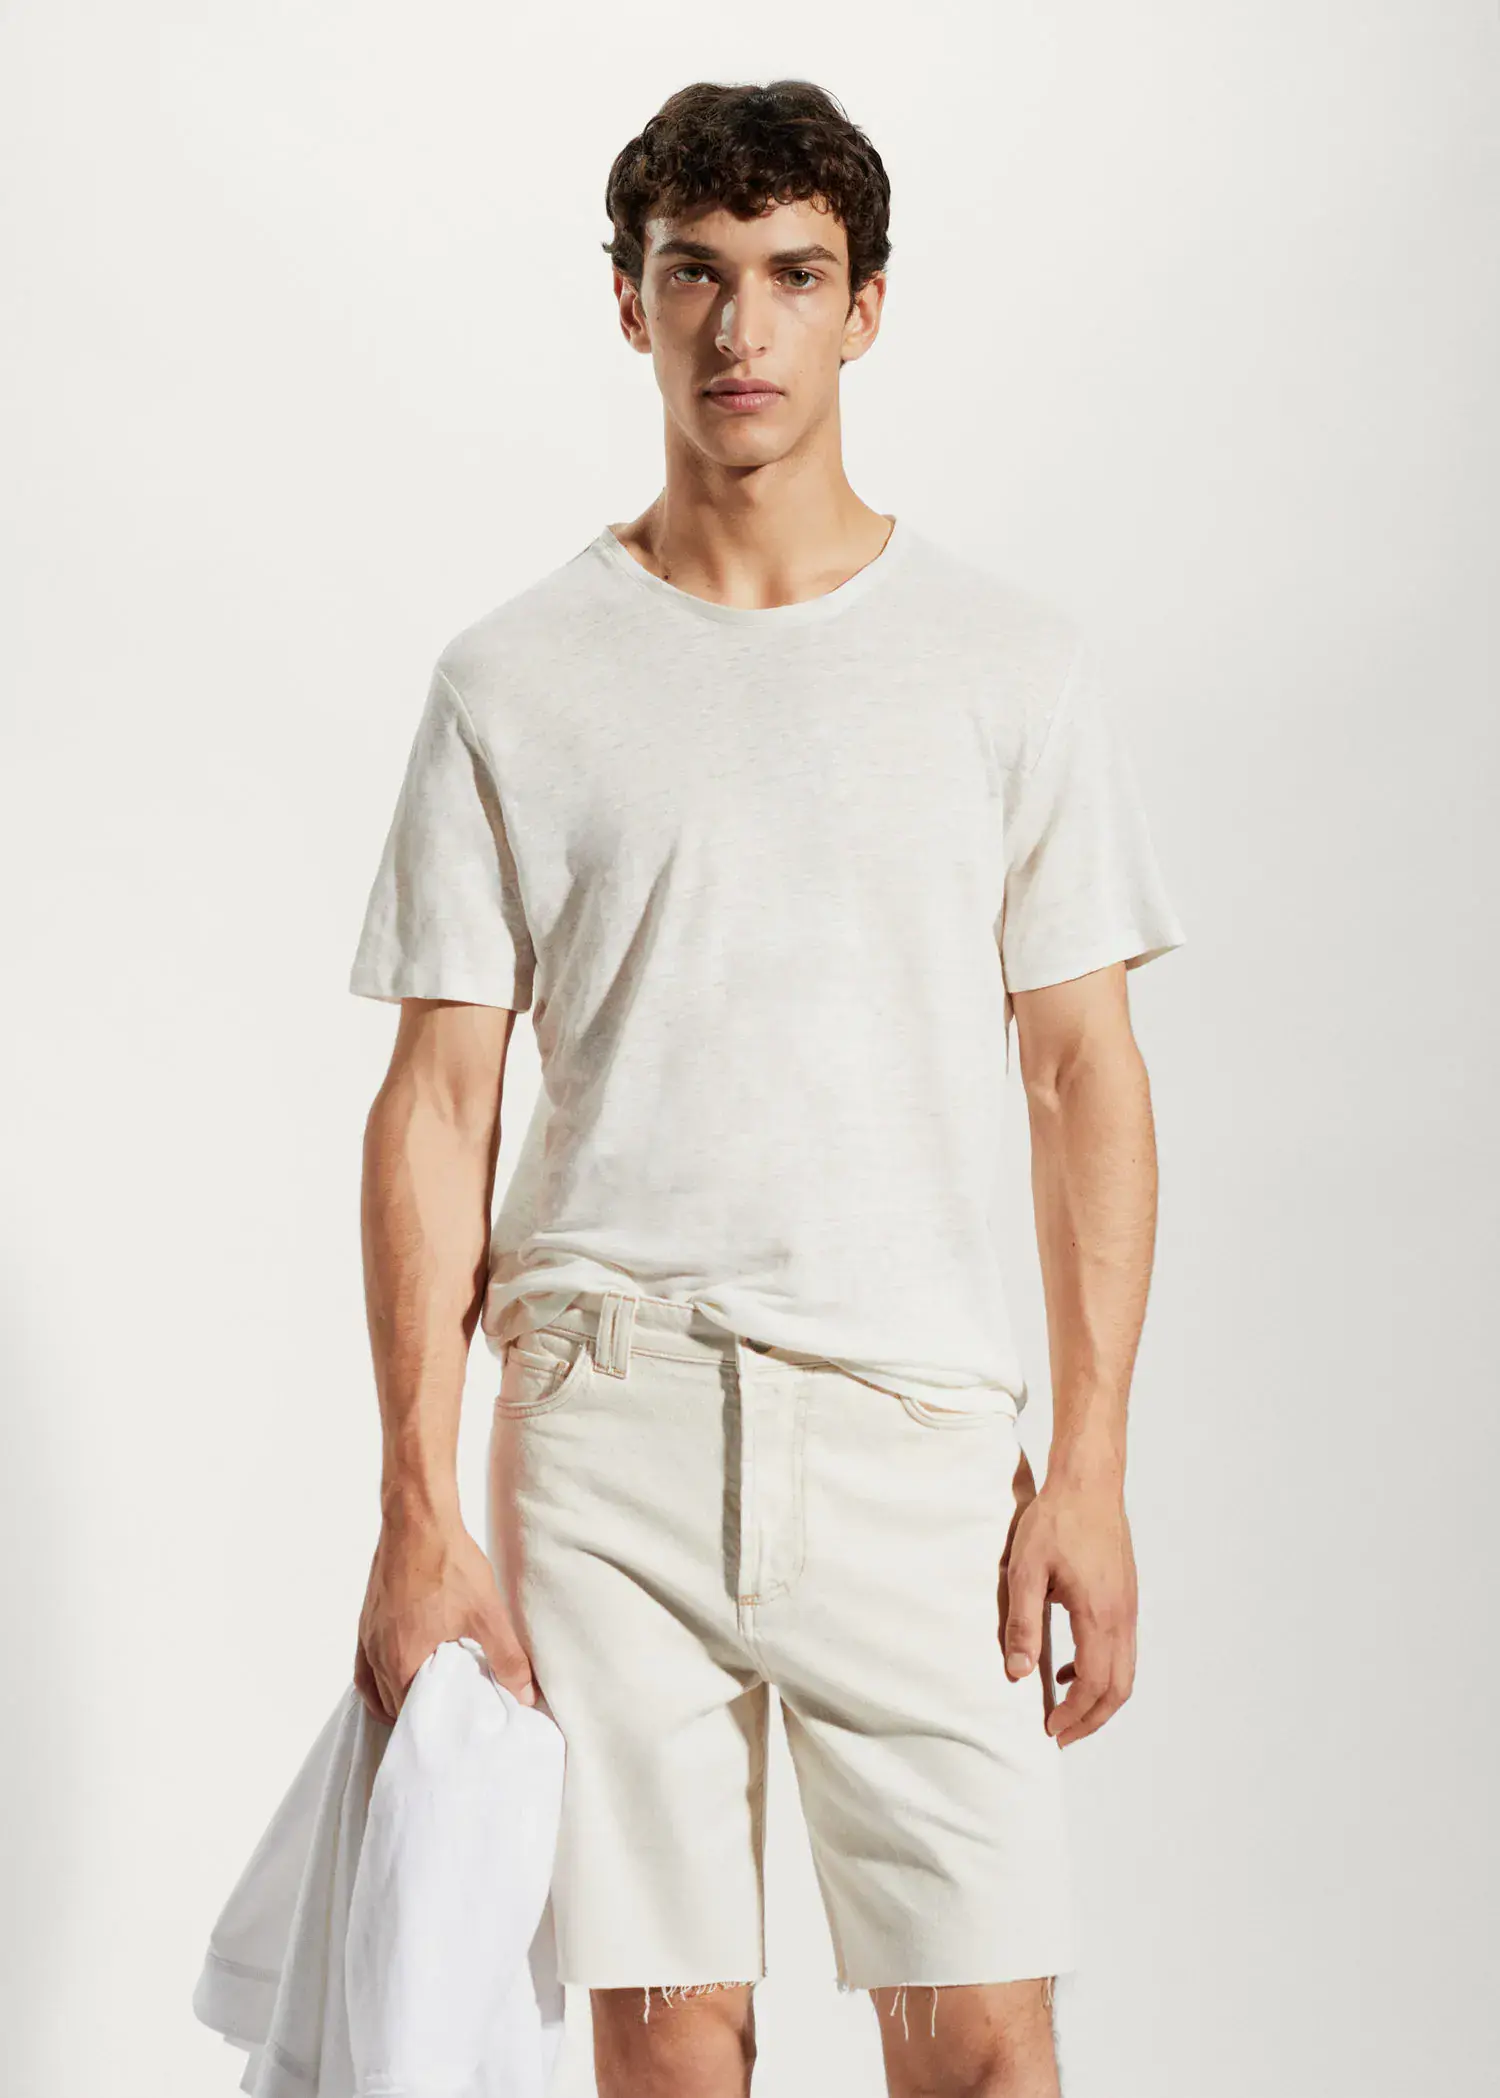 Mango 100% linen slim-fit t-shirt. a man in white shirt and shorts holding a white object. 